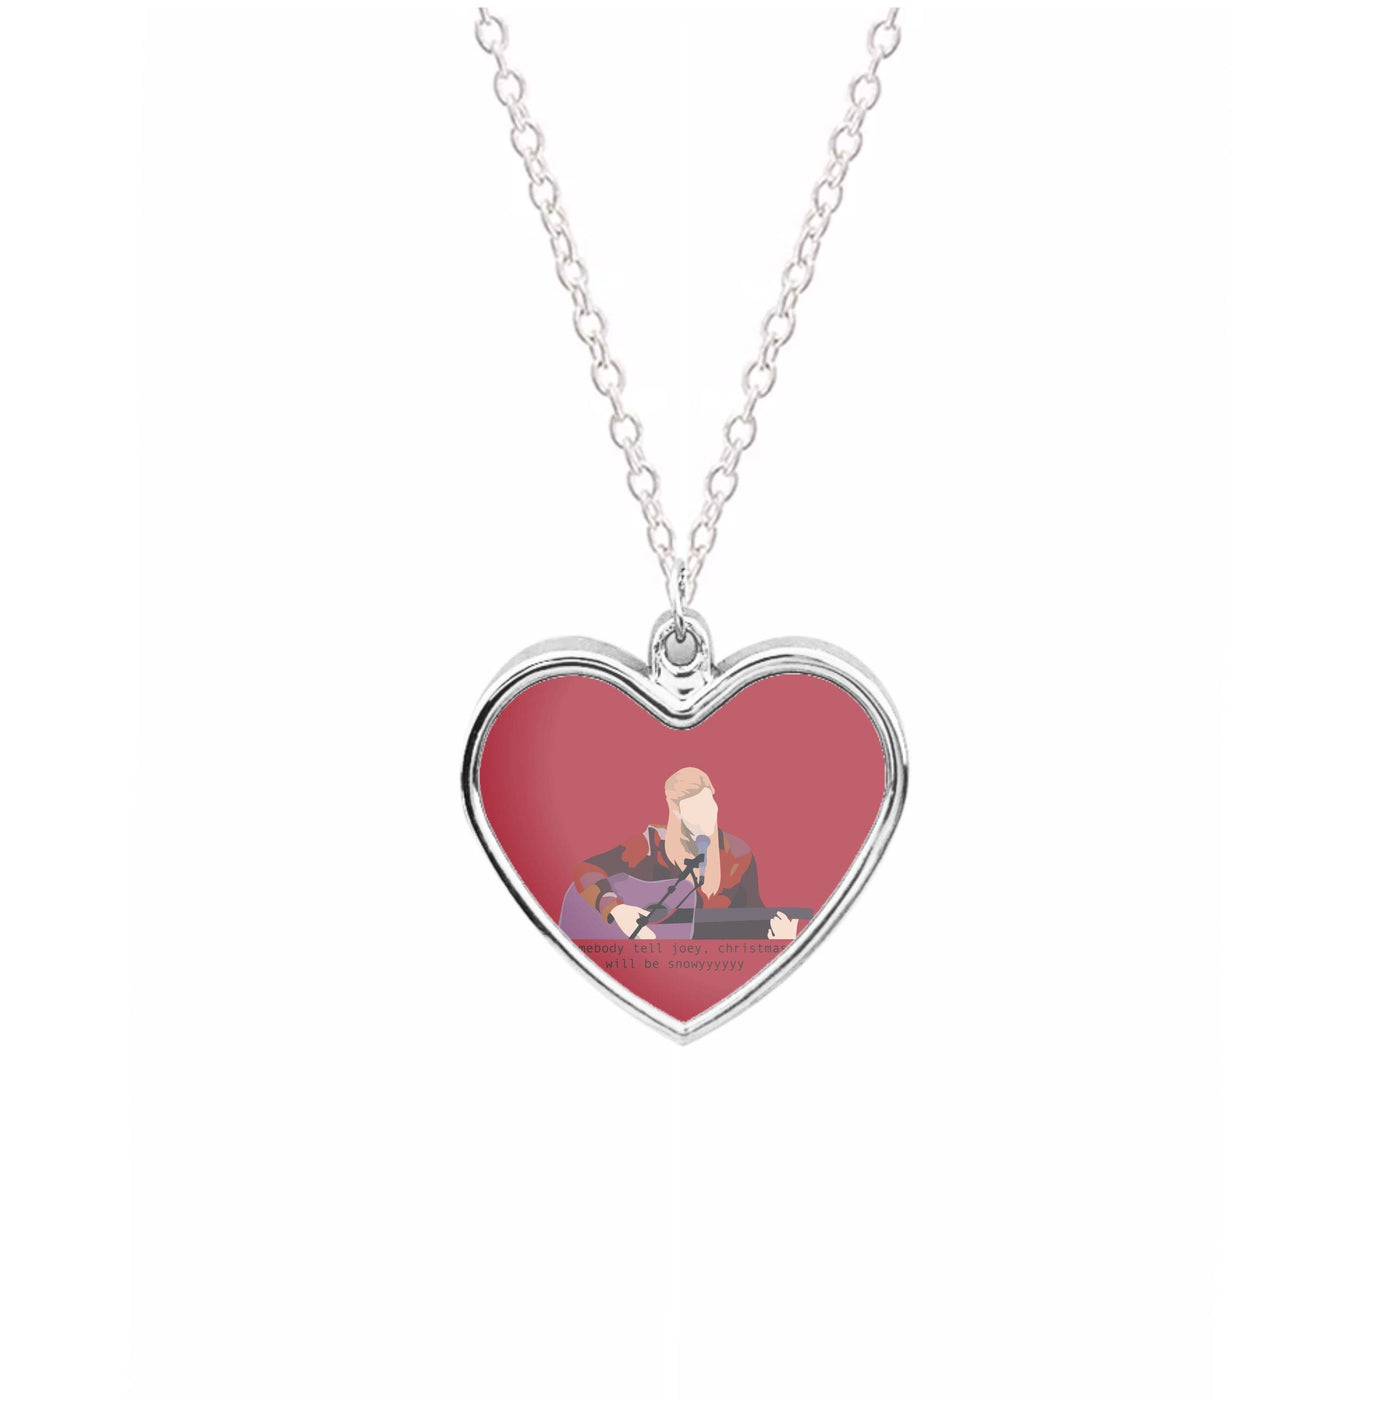 Somebody Tell Joey, Christmas Will Be Snowyyy - Friends Necklace